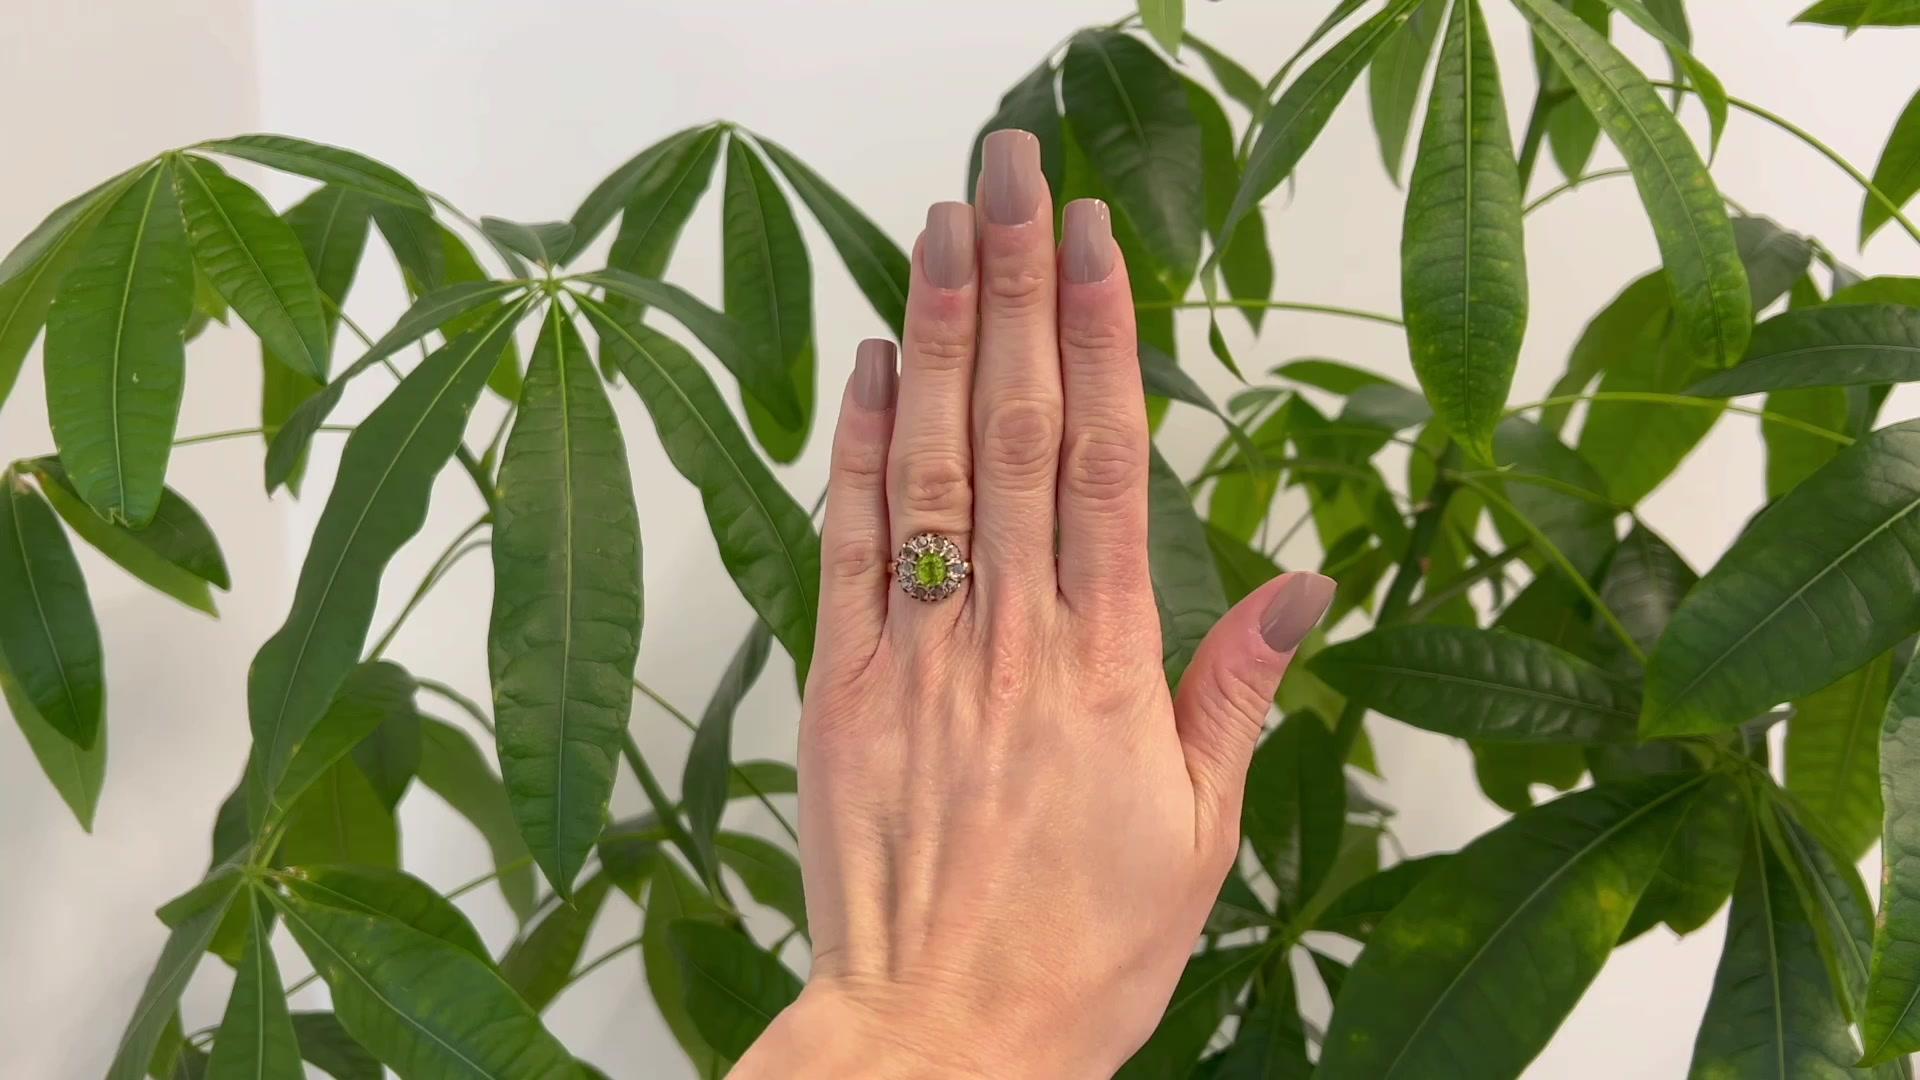 One Antique Inspired 1.73 Carats Peridot Diamond 14 Karat Gold Cluster Ring. Featuring one oval mixed cut peridot weighing 1.73 carats. Accented by 10 senaille cut diamonds with a total weight of approximately 0.20 carat, graded I color, I1 clarity.